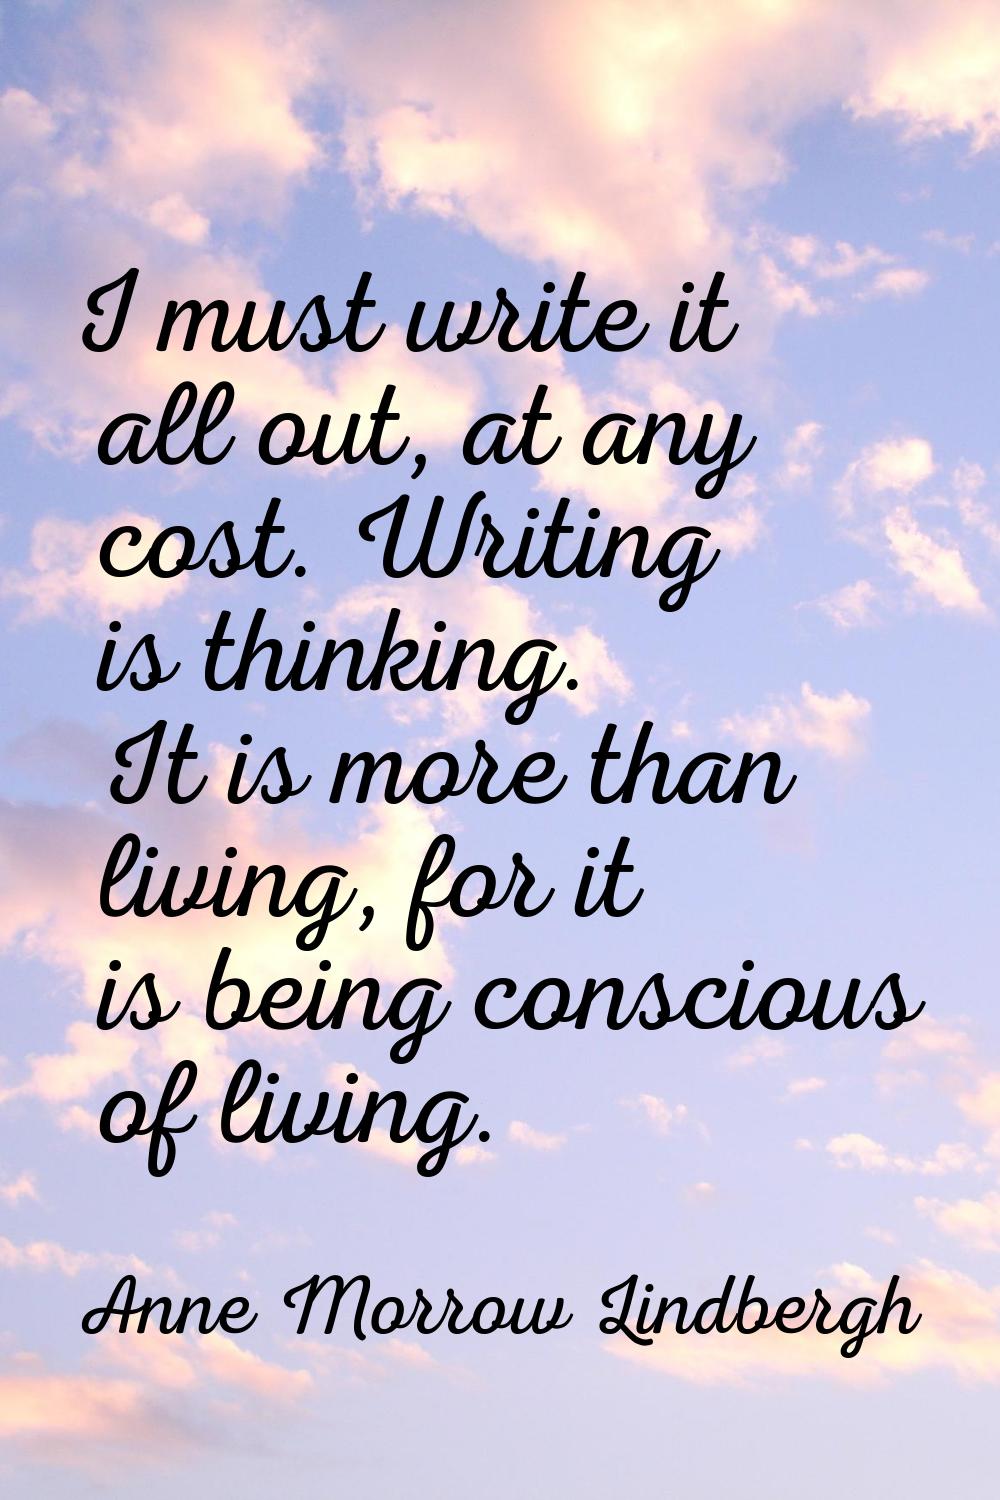 I must write it all out, at any cost. Writing is thinking. It is more than living, for it is being 